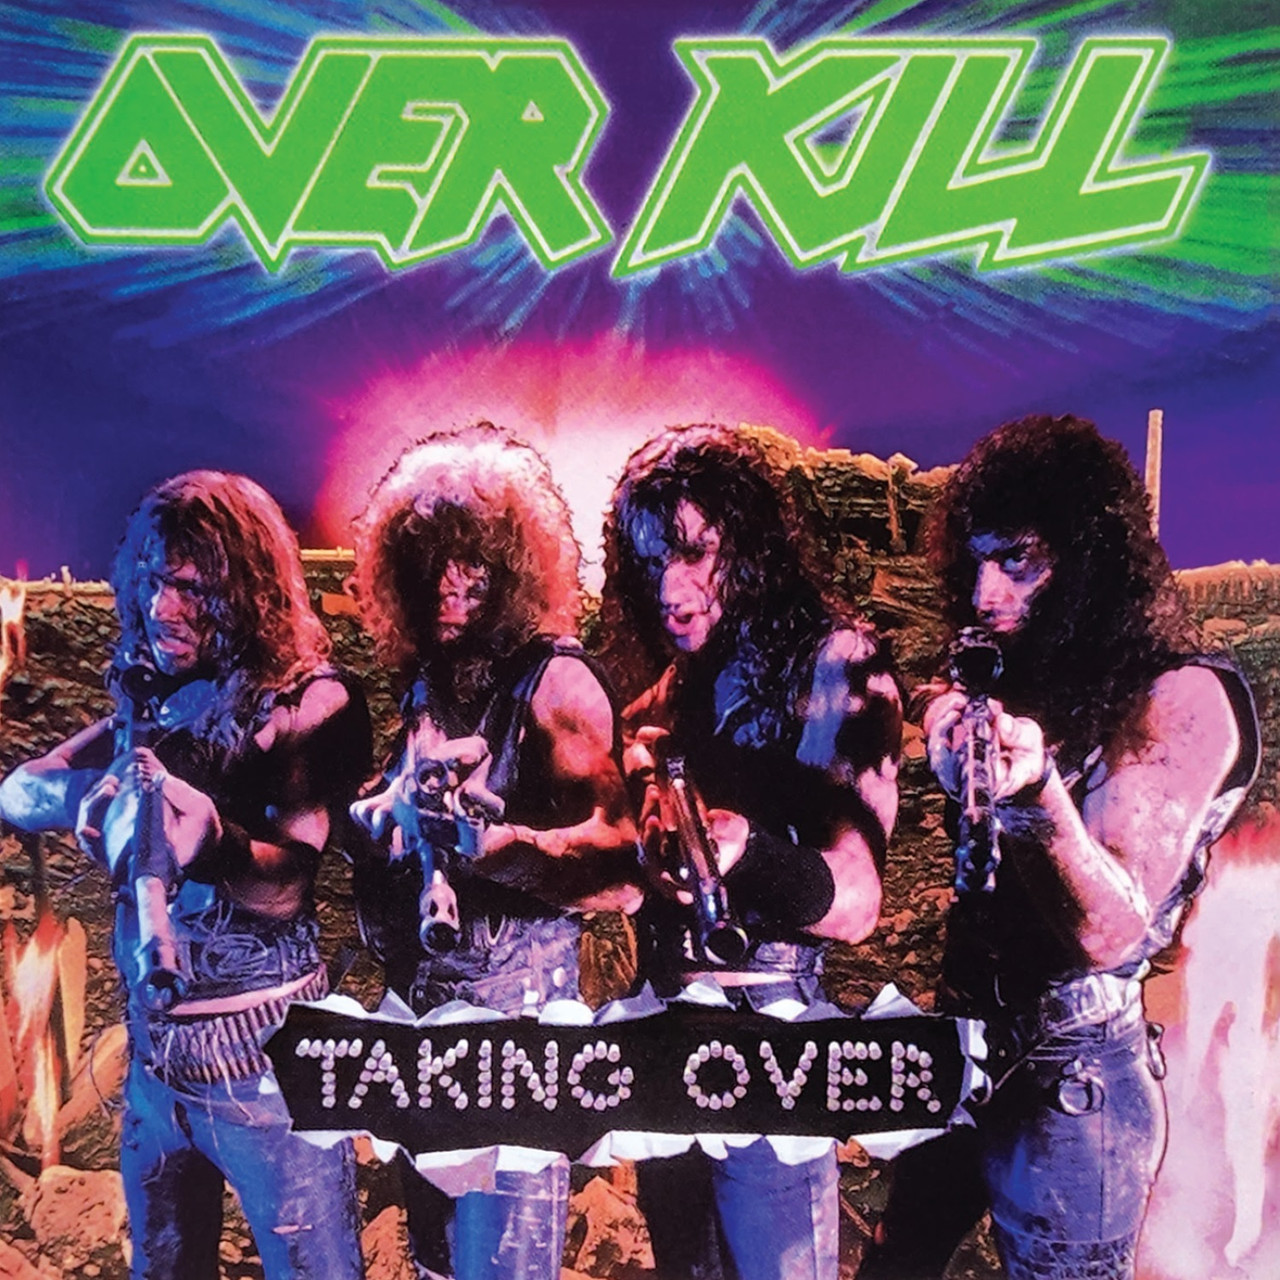 PRE-ORDER - Overkill 'Taking Over' LP Pink Black Marble Vinyl - RELEASE DATE 3rd March 2023